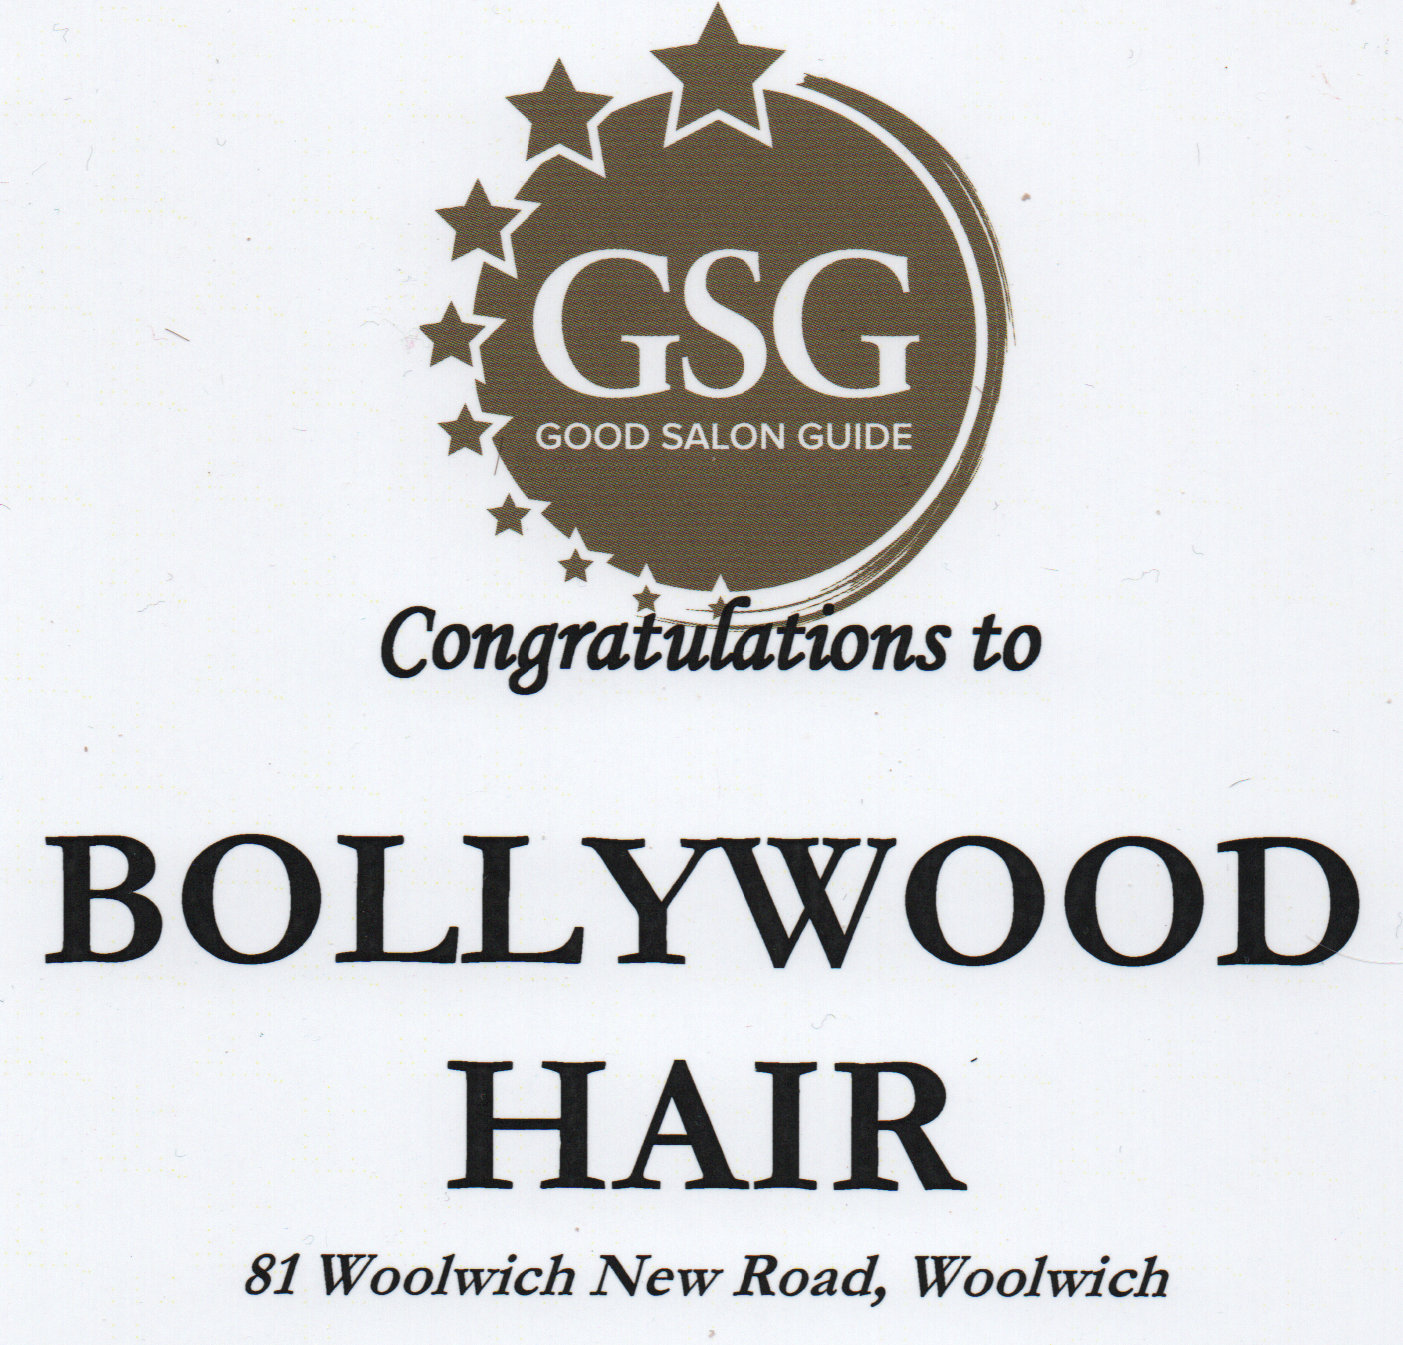 5 Star Rated, Good Salon Guide. Woolwich Hairdresser, Hair Styling -  Bollywood Hair - 5 Star Rated Hair Salon - Woolwich